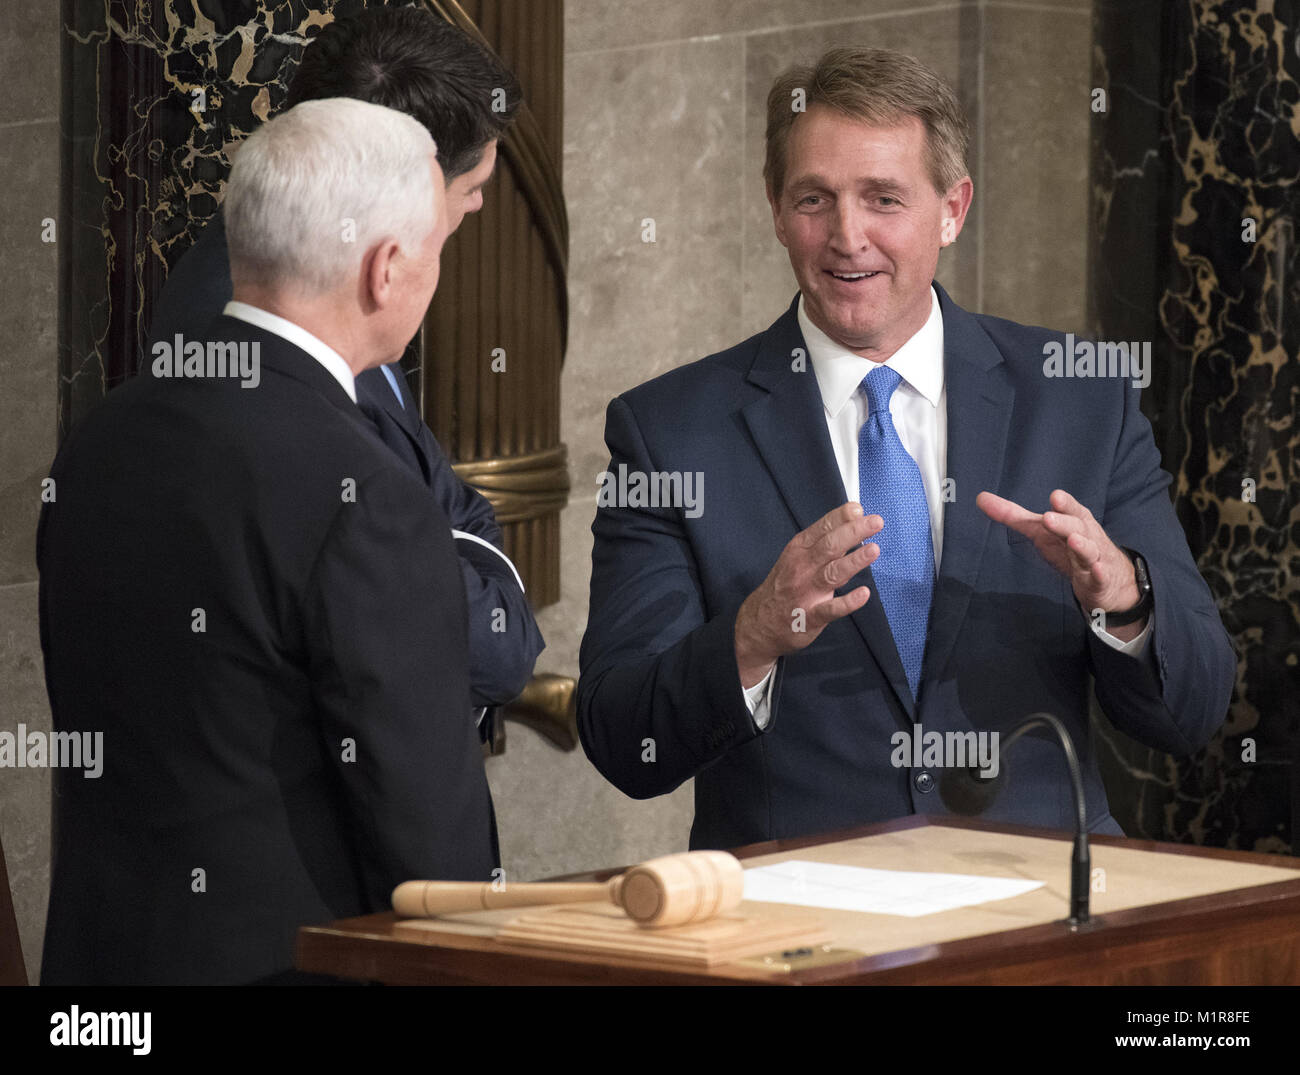 January 30, 2018 - Washington, District of Columbia, United States of America - United States Senator Jeff Flake (Republican of Arizona), right, has a conversation with US Vice President Mike Pence and Speaker of the United States House of Representatives Paul Ryan (Republican of Wisconsin) on the rostrum prior to the arrival of US President Donald J. Trump who will deliver his first State of the Union address to a joint session of the US Congress in the US House chamber in the US Capitol in Washington, DC on Tuesday, January 30, 2018.Credit: Ron Sachs/CNP (Credit Image: © Ron Sachs/CNP via Stock Photo